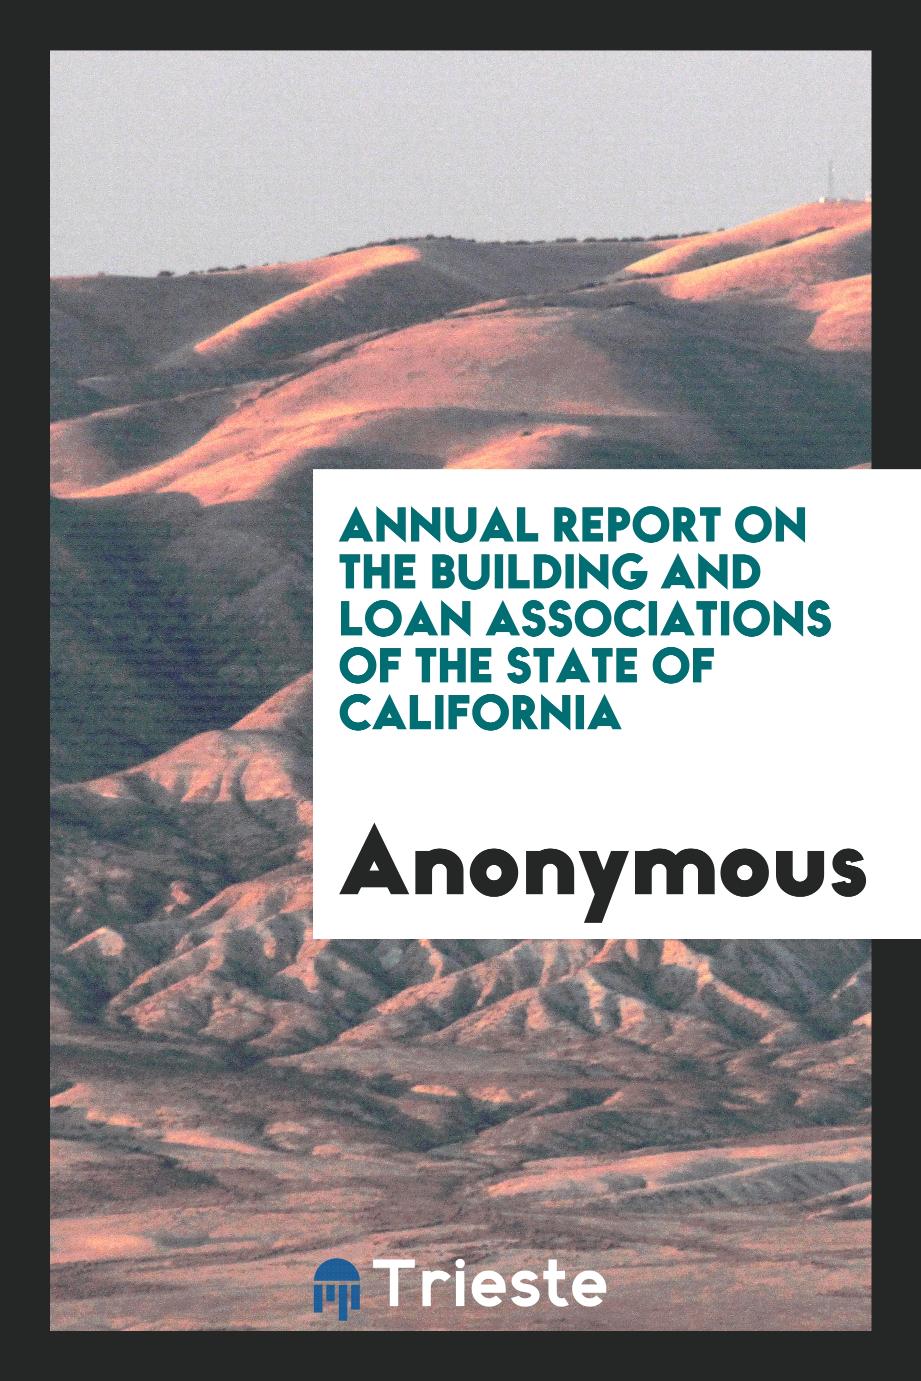 Annual report on the Building and Loan Associations of the State of California